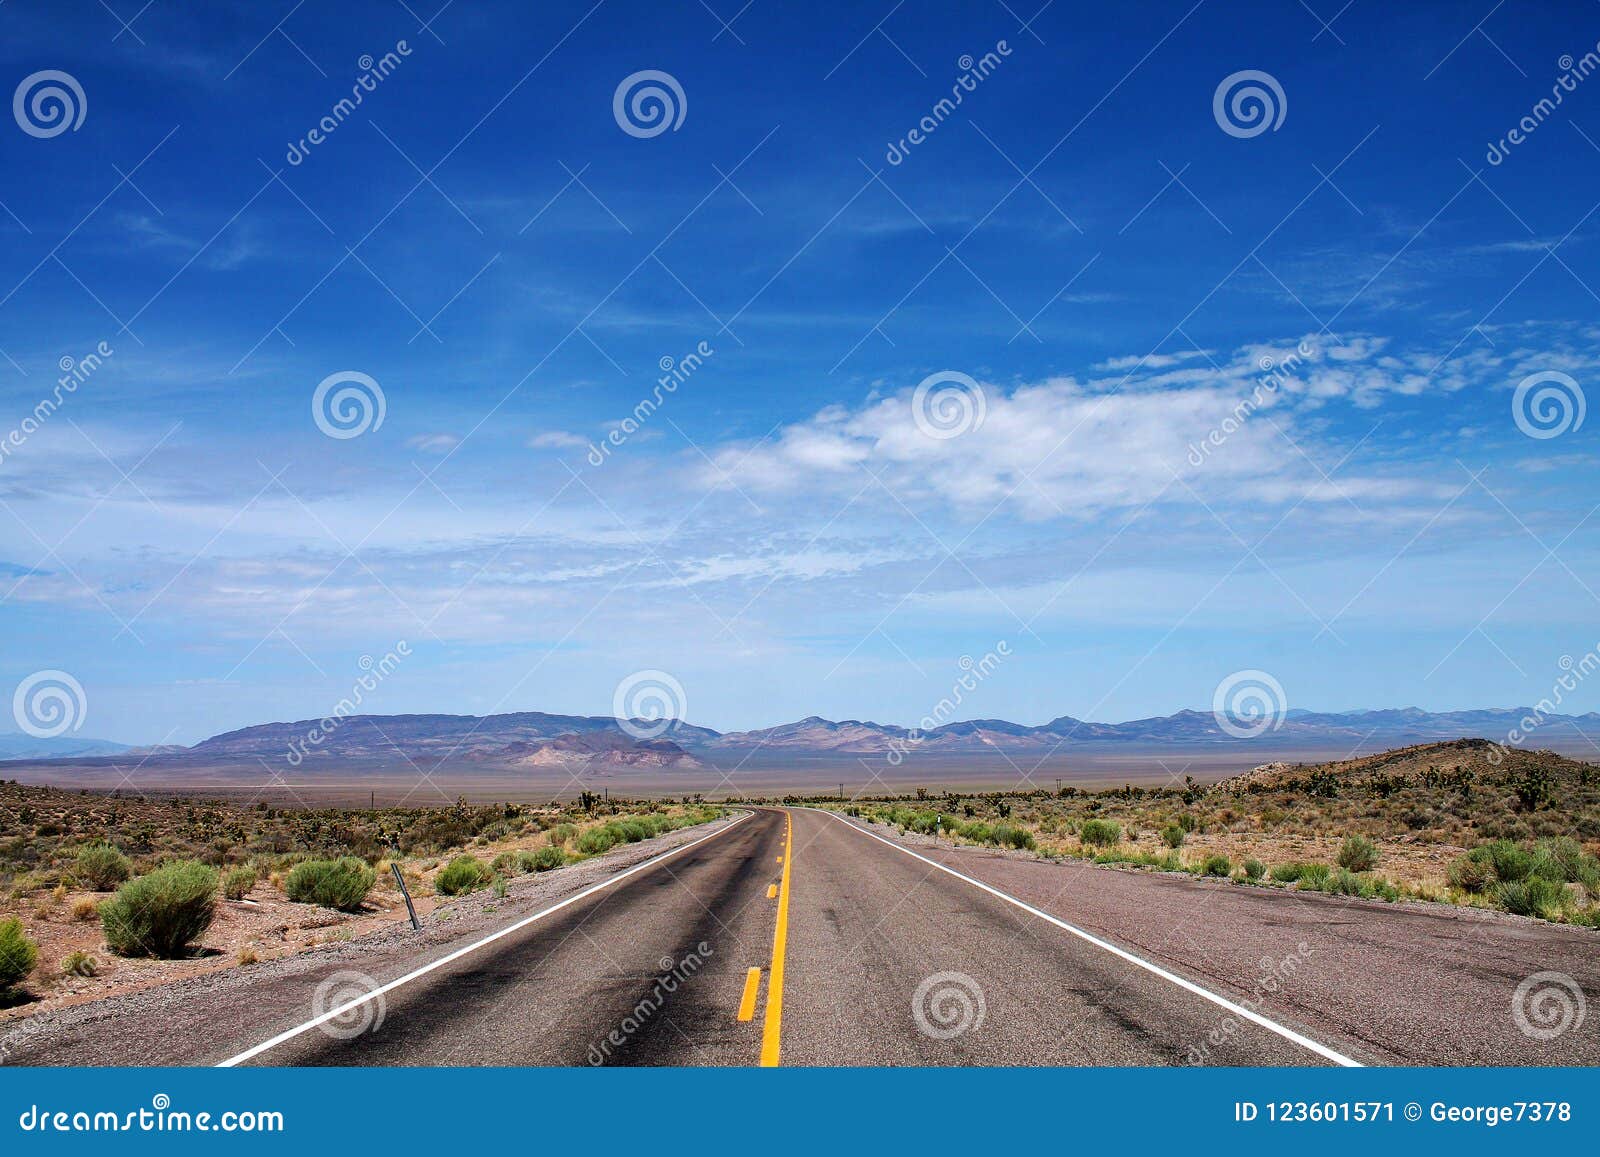 empty desert road with open sky and distant mountains in nevada